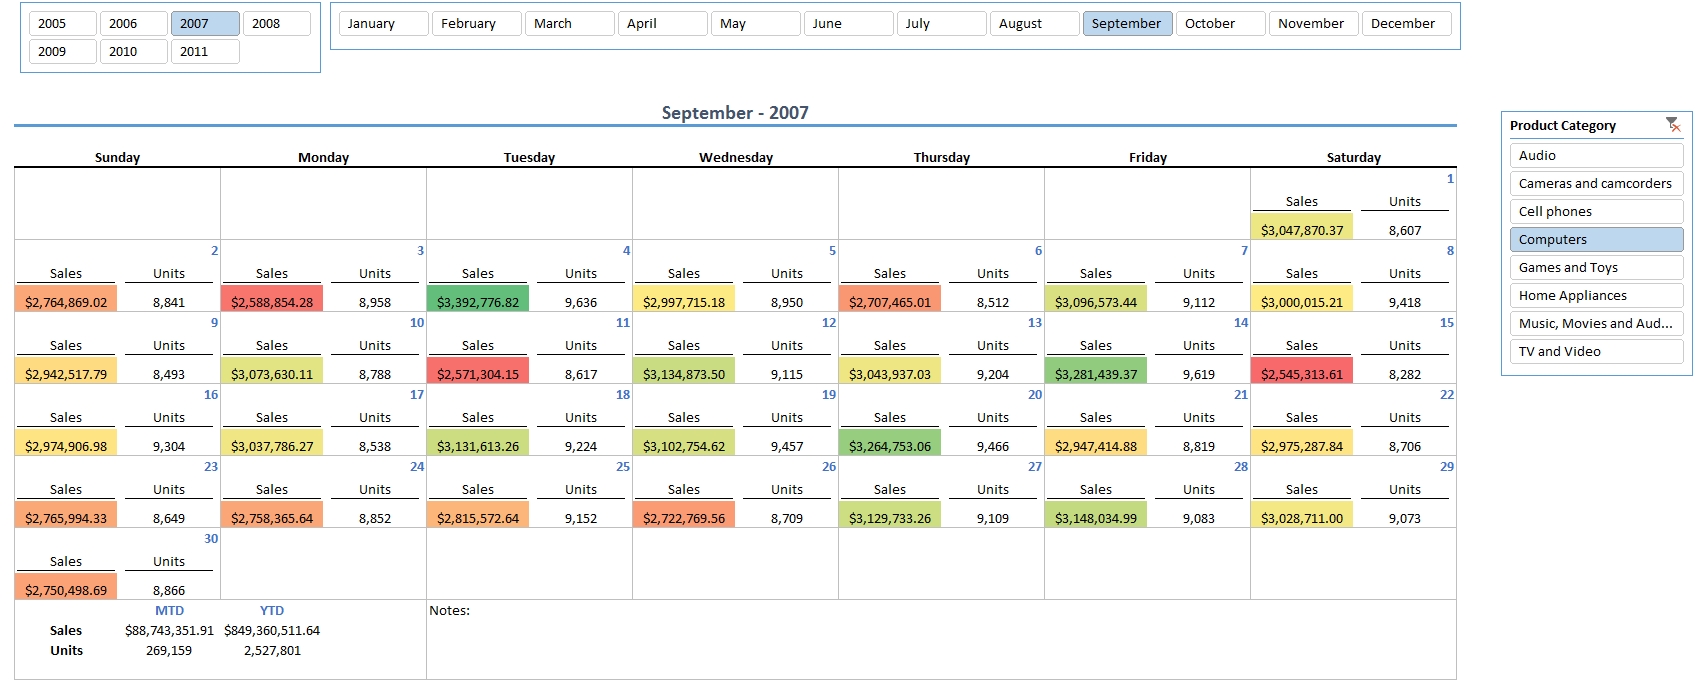 Calendar Reporting With Excel And Power Pivot | Analysis